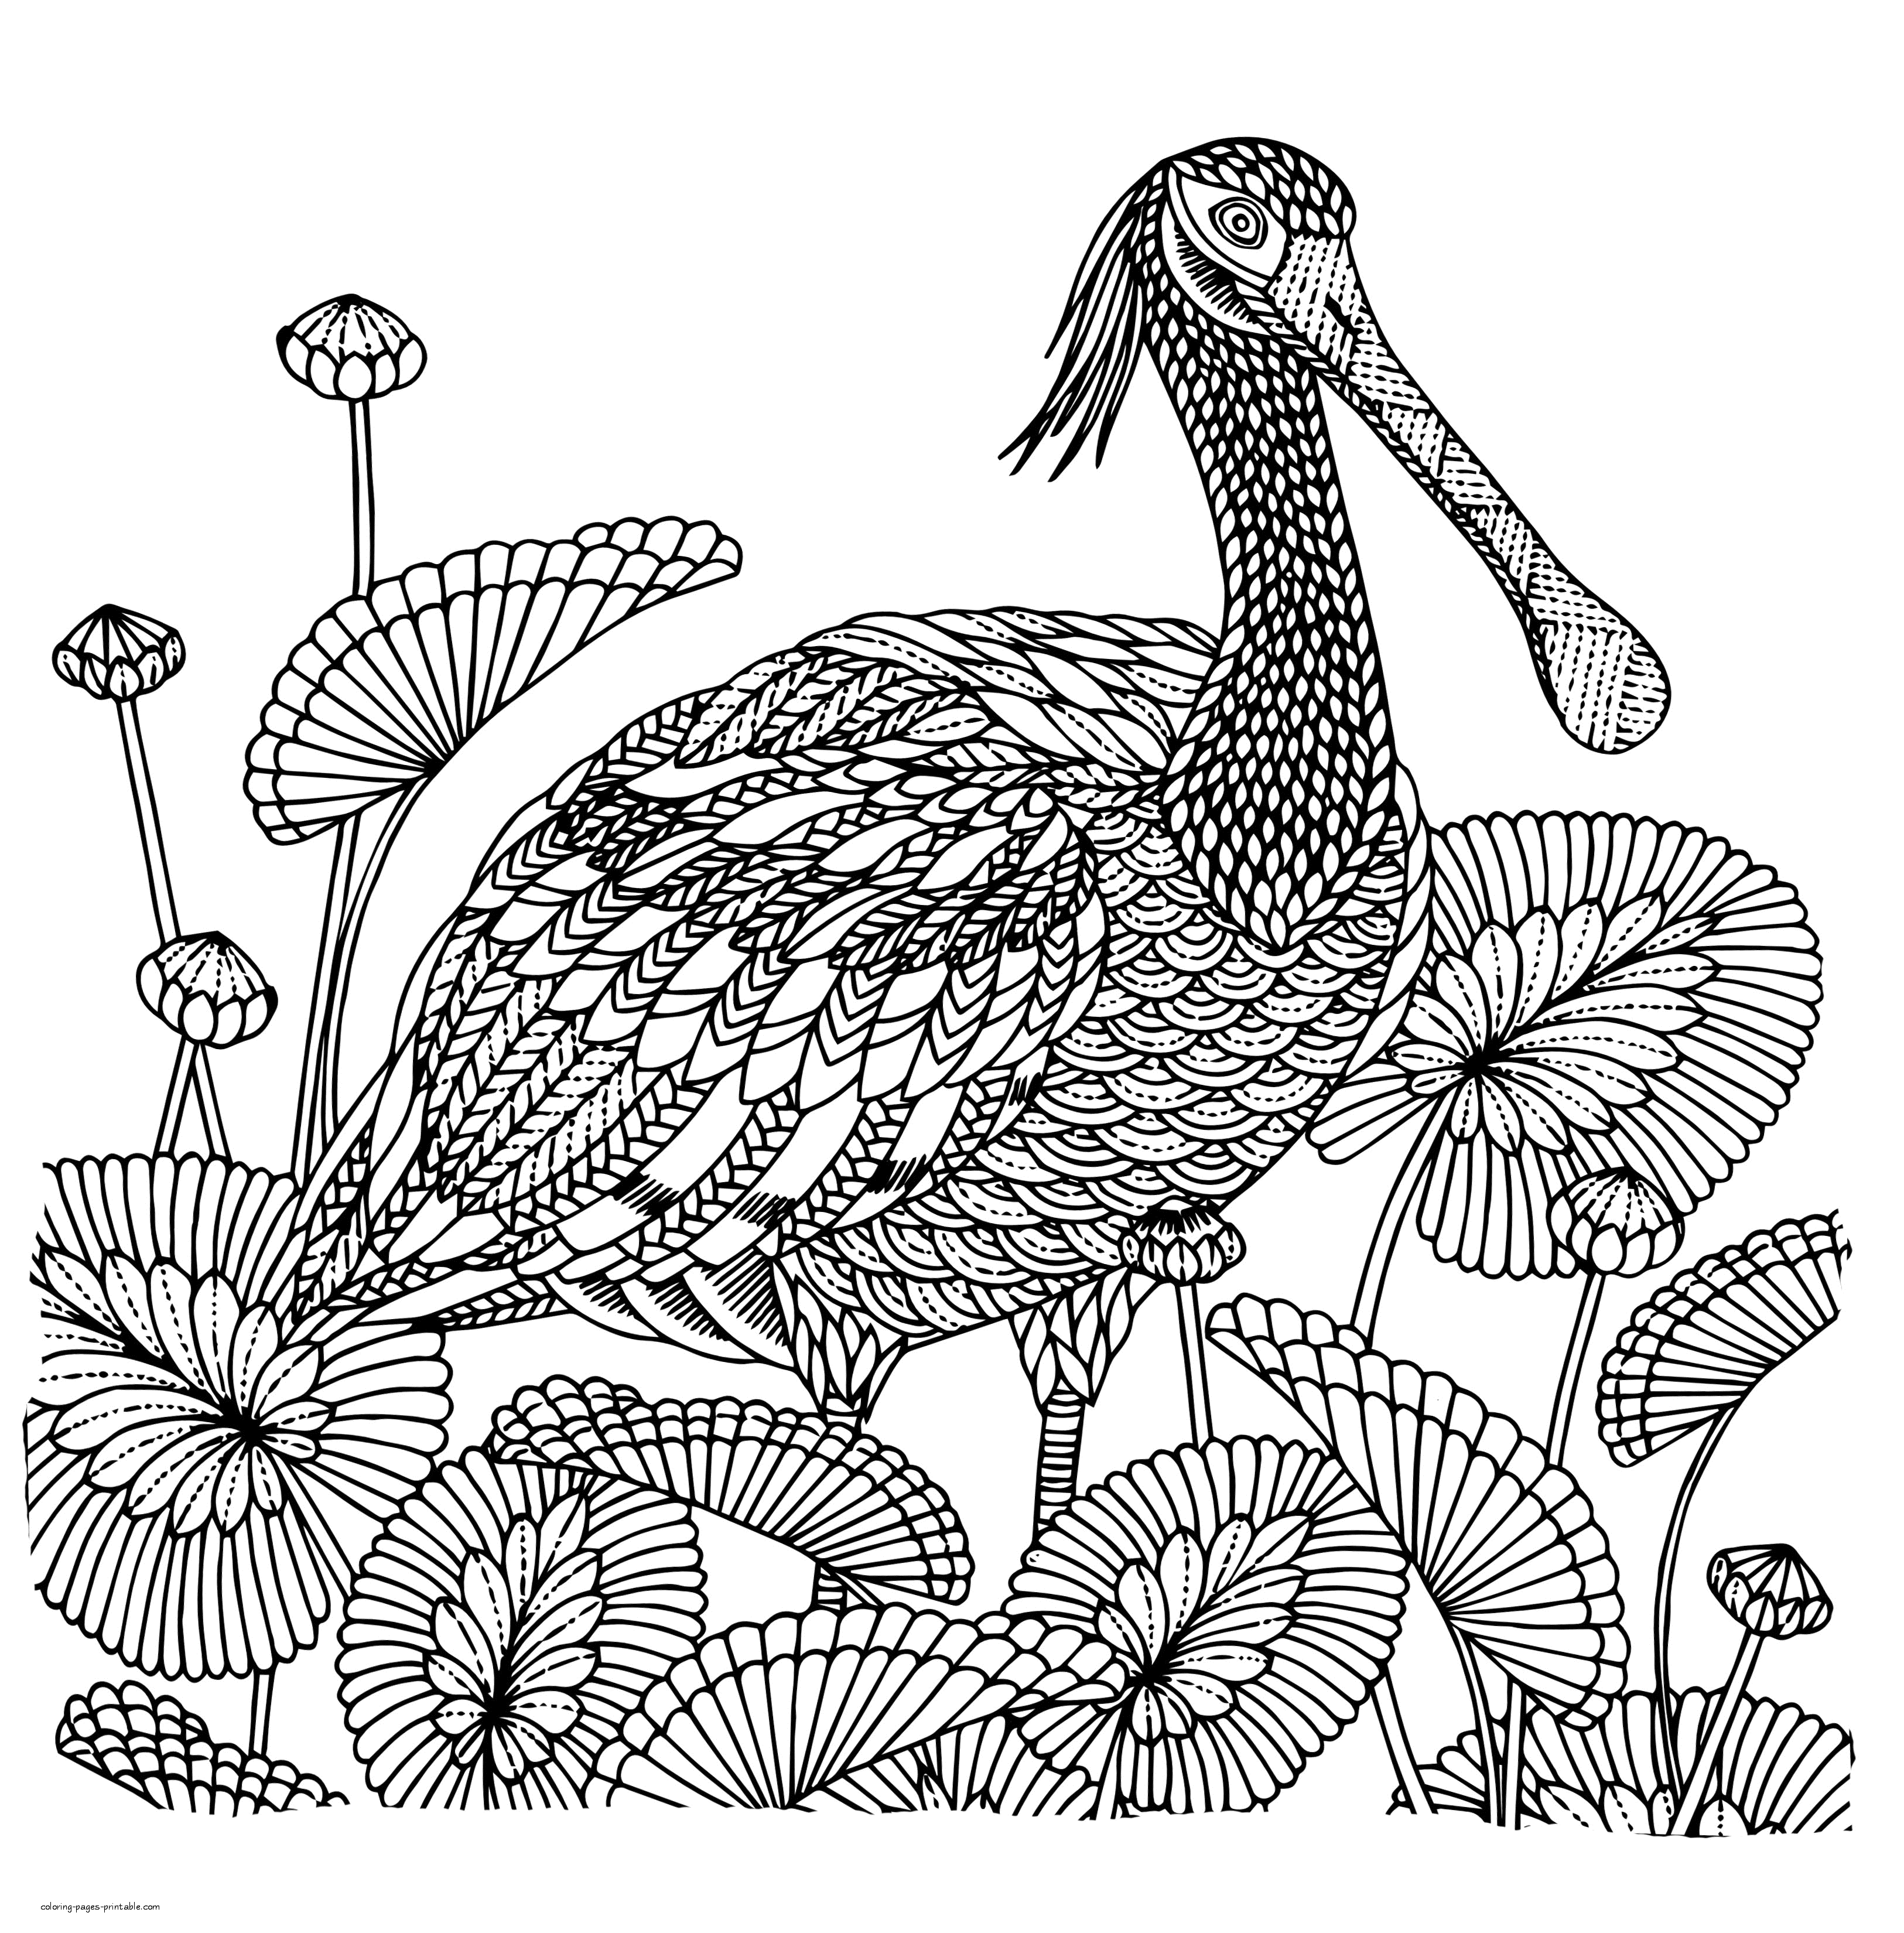 Detailed Bird Coloring Page    COLORING PAGES PRINTABLE.COM